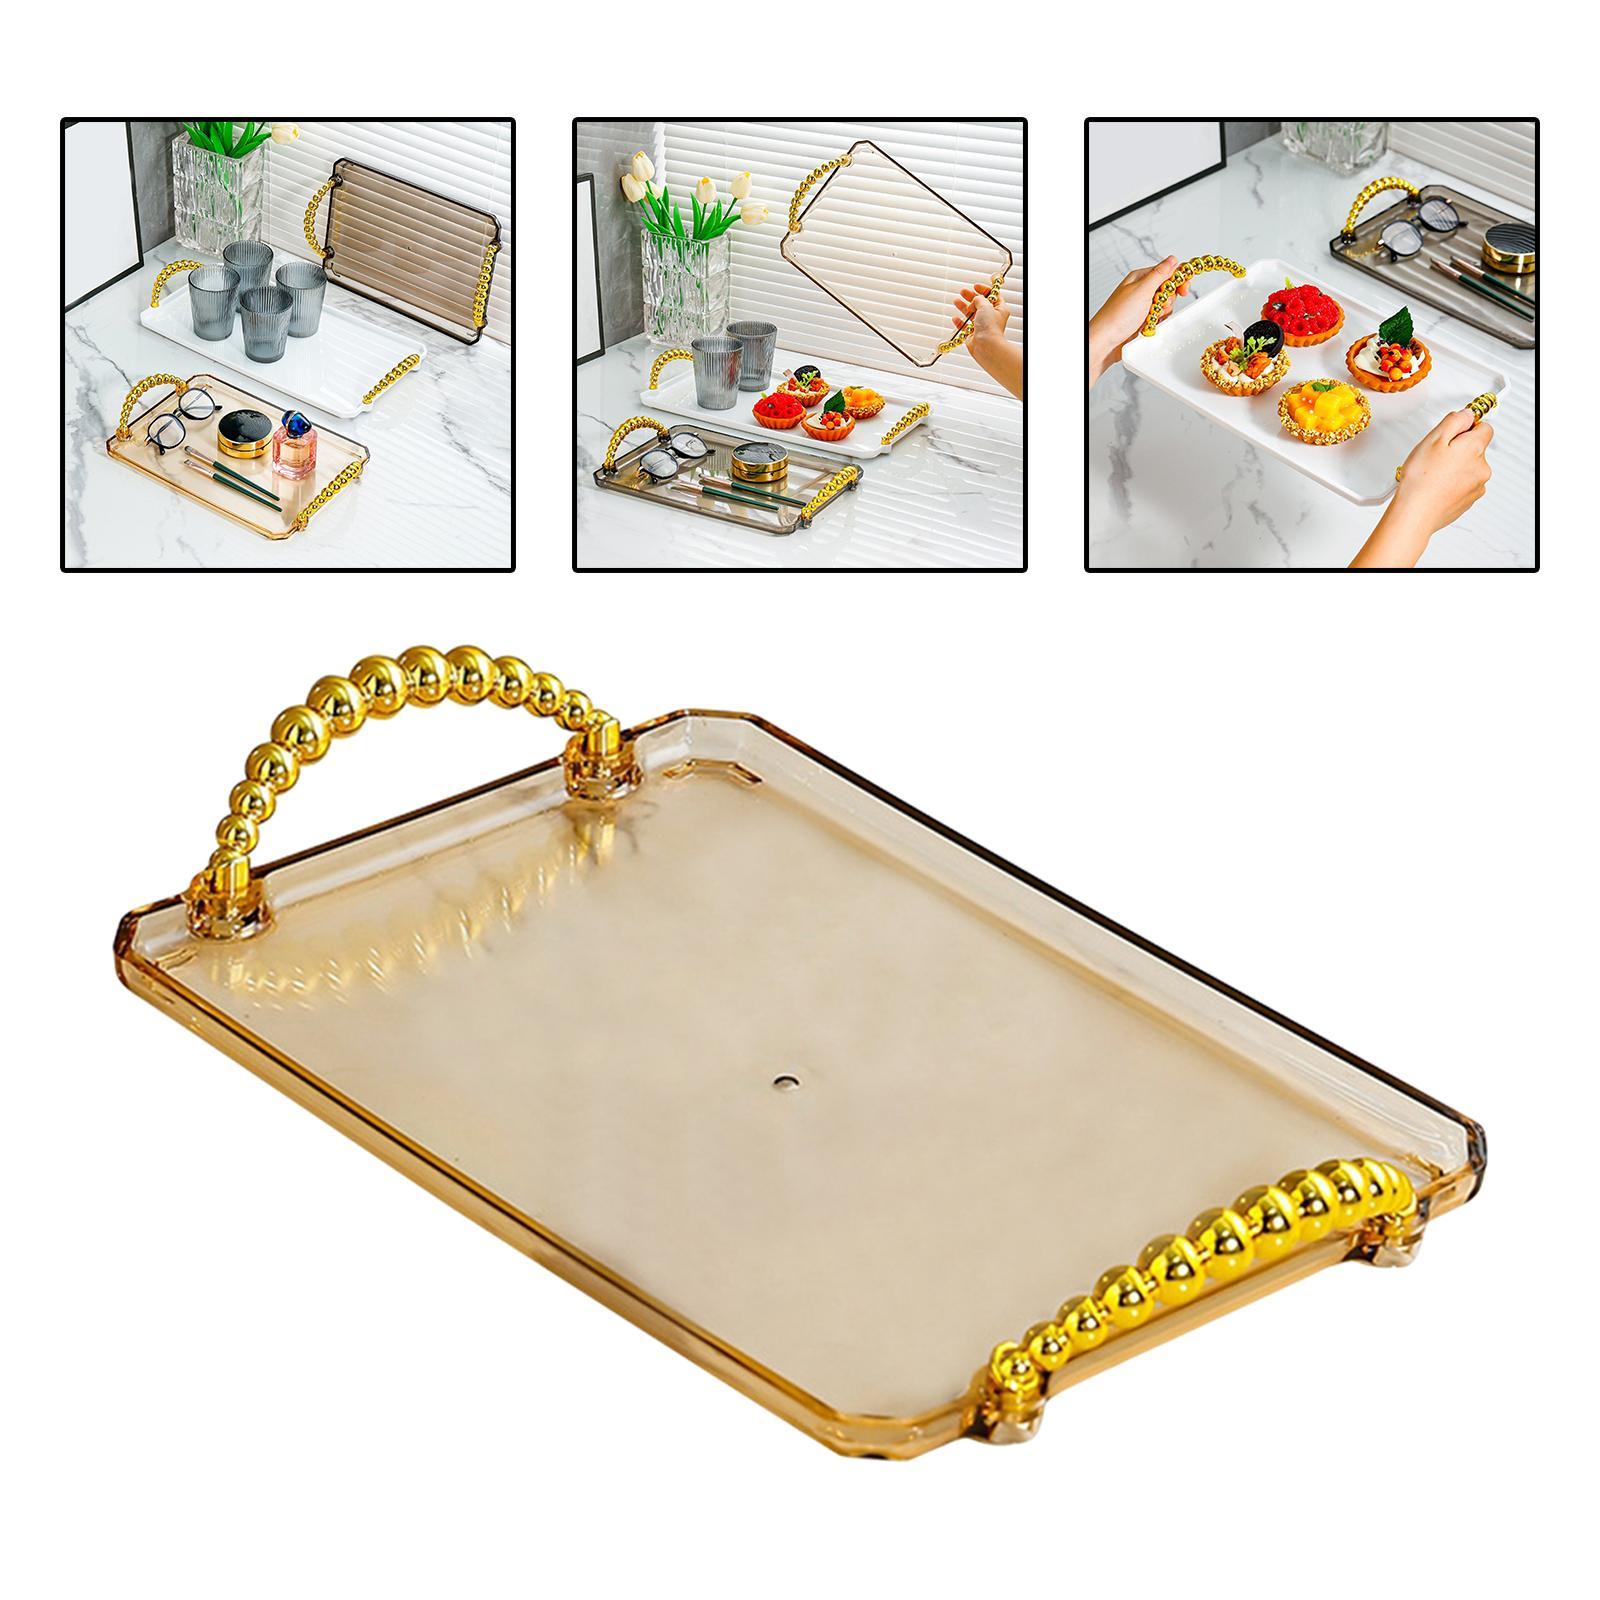 Nordic Serving Tray, Storage Organizer, Multifunction Dessert Tray Food Snack Tray for Home Kitchen